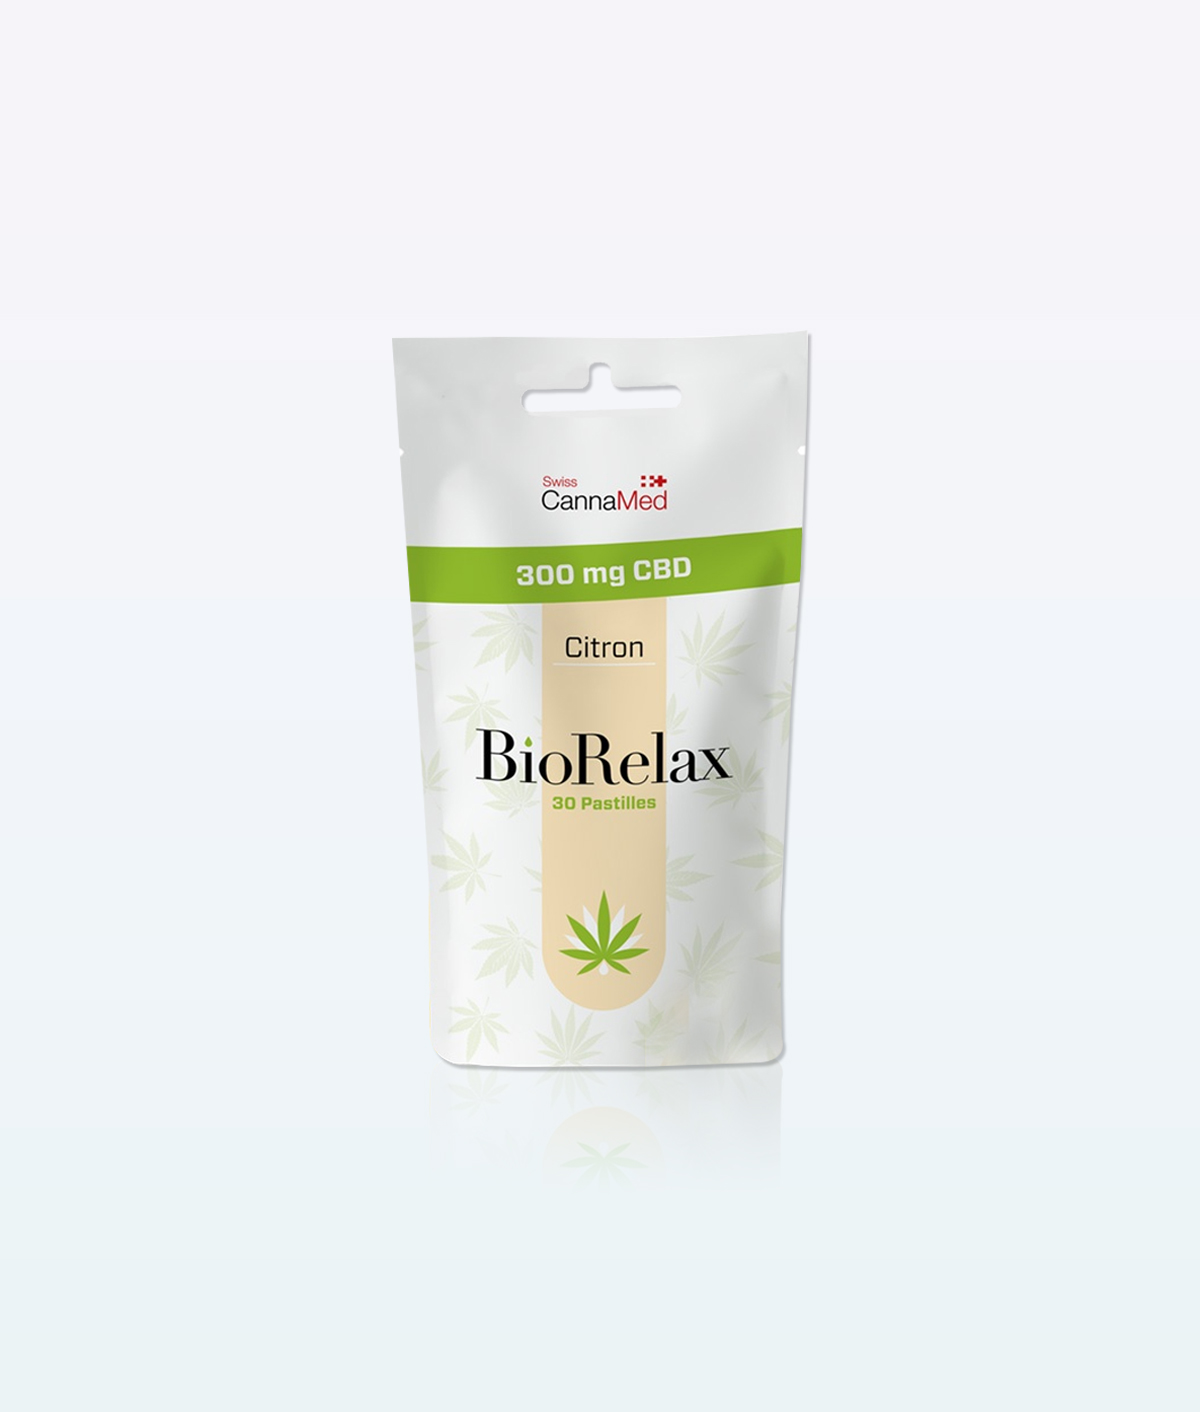 CannaMed Bio Relax 30 Pastilles